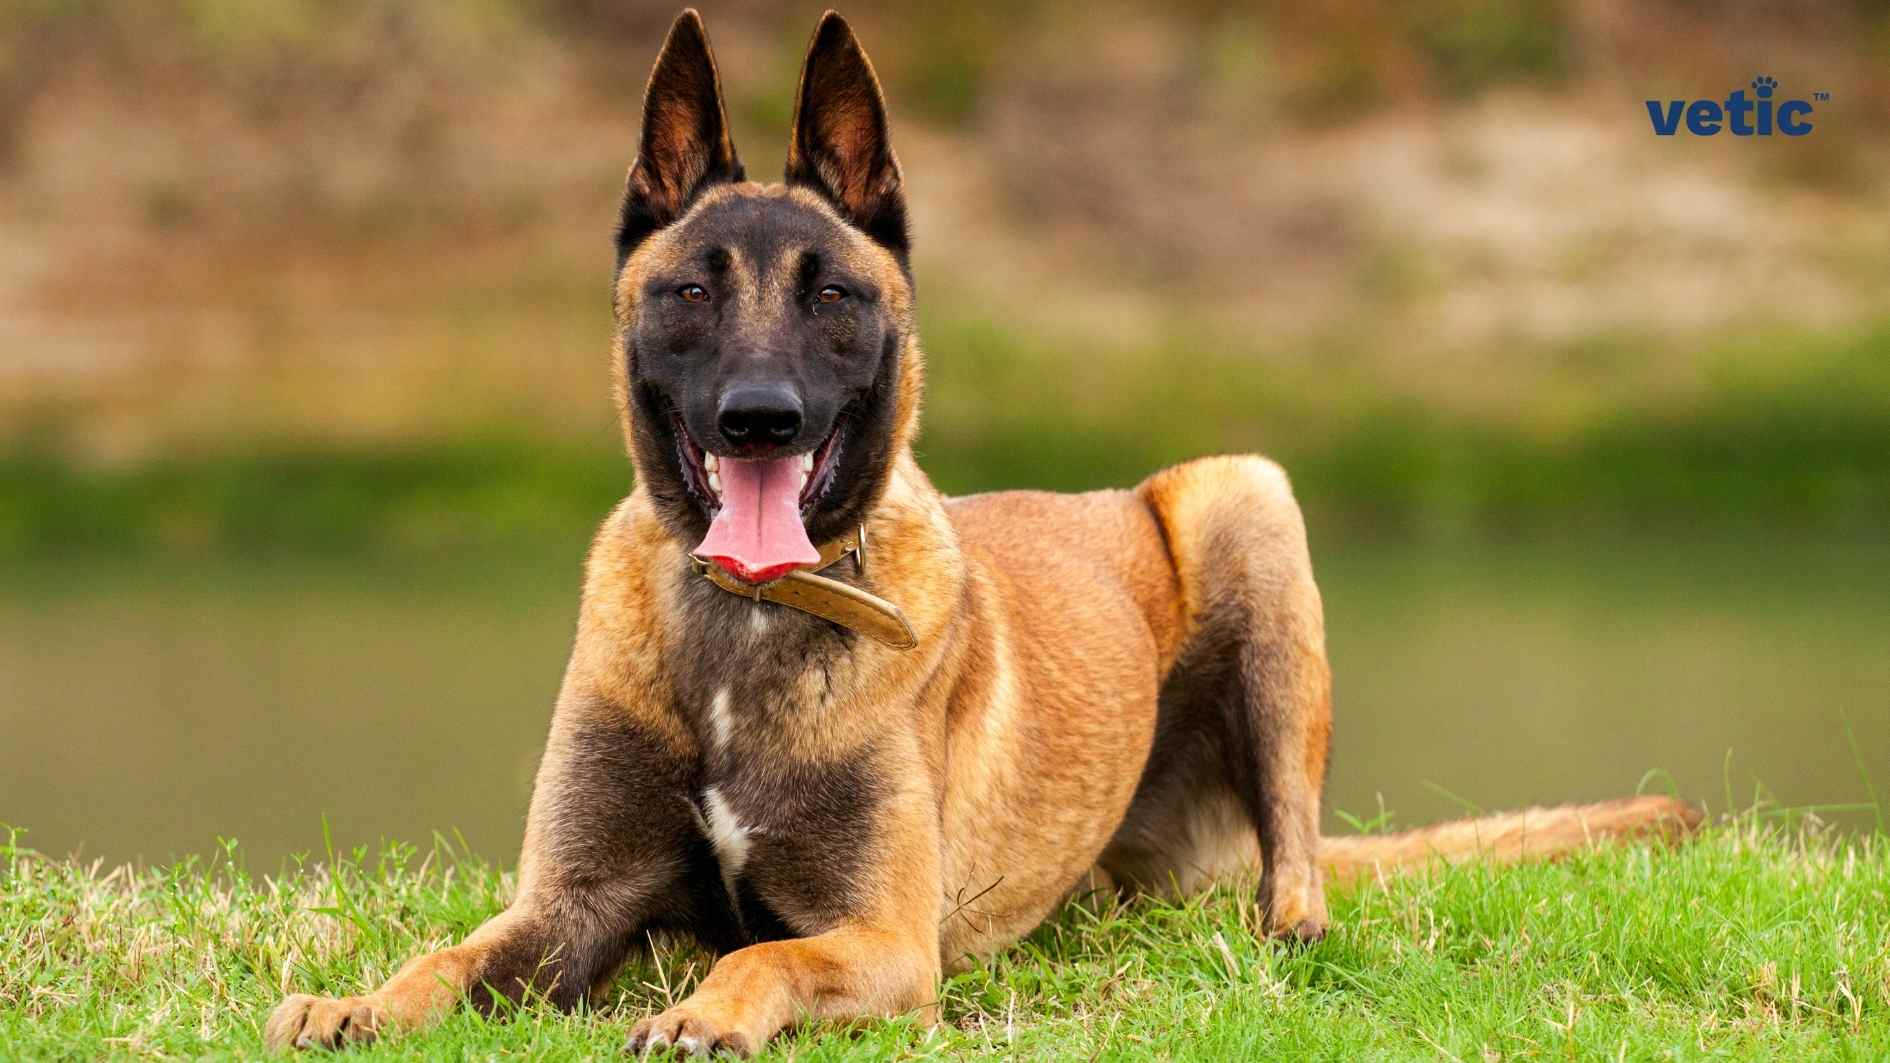 An image of a Belgian Malinois sitting down on all fours. The dog is of the traditional brown colour with a black mask. They are wearing a light camel brown leather collar. The Belgian Malinois is looking directly at the camera and has their tongue out. It is a part of a series of photos on German Shepherd and Belgian Malinois dogs that is featured on the vetic blog. The image has a Vetic copyright on the top right corner.